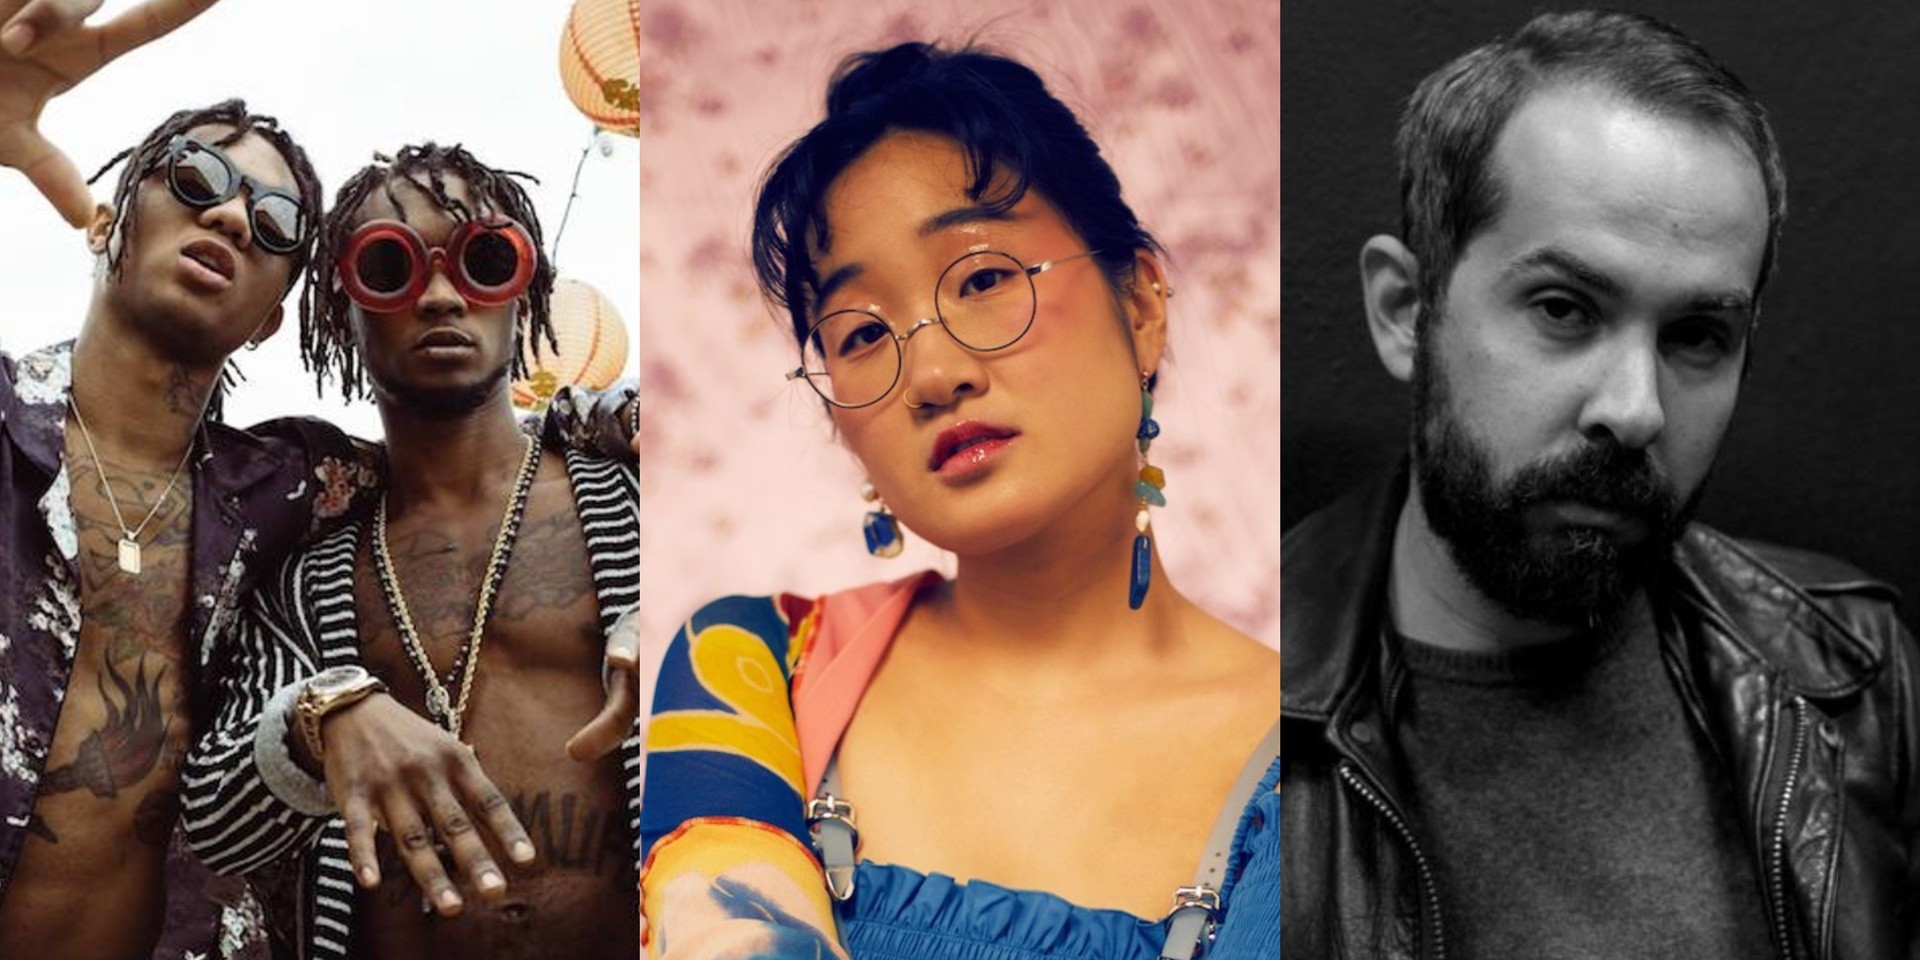 We The Fest announces Phase 1 line-up - Rae Sremmurd, Yaeji, Cigarettes After Sex and more